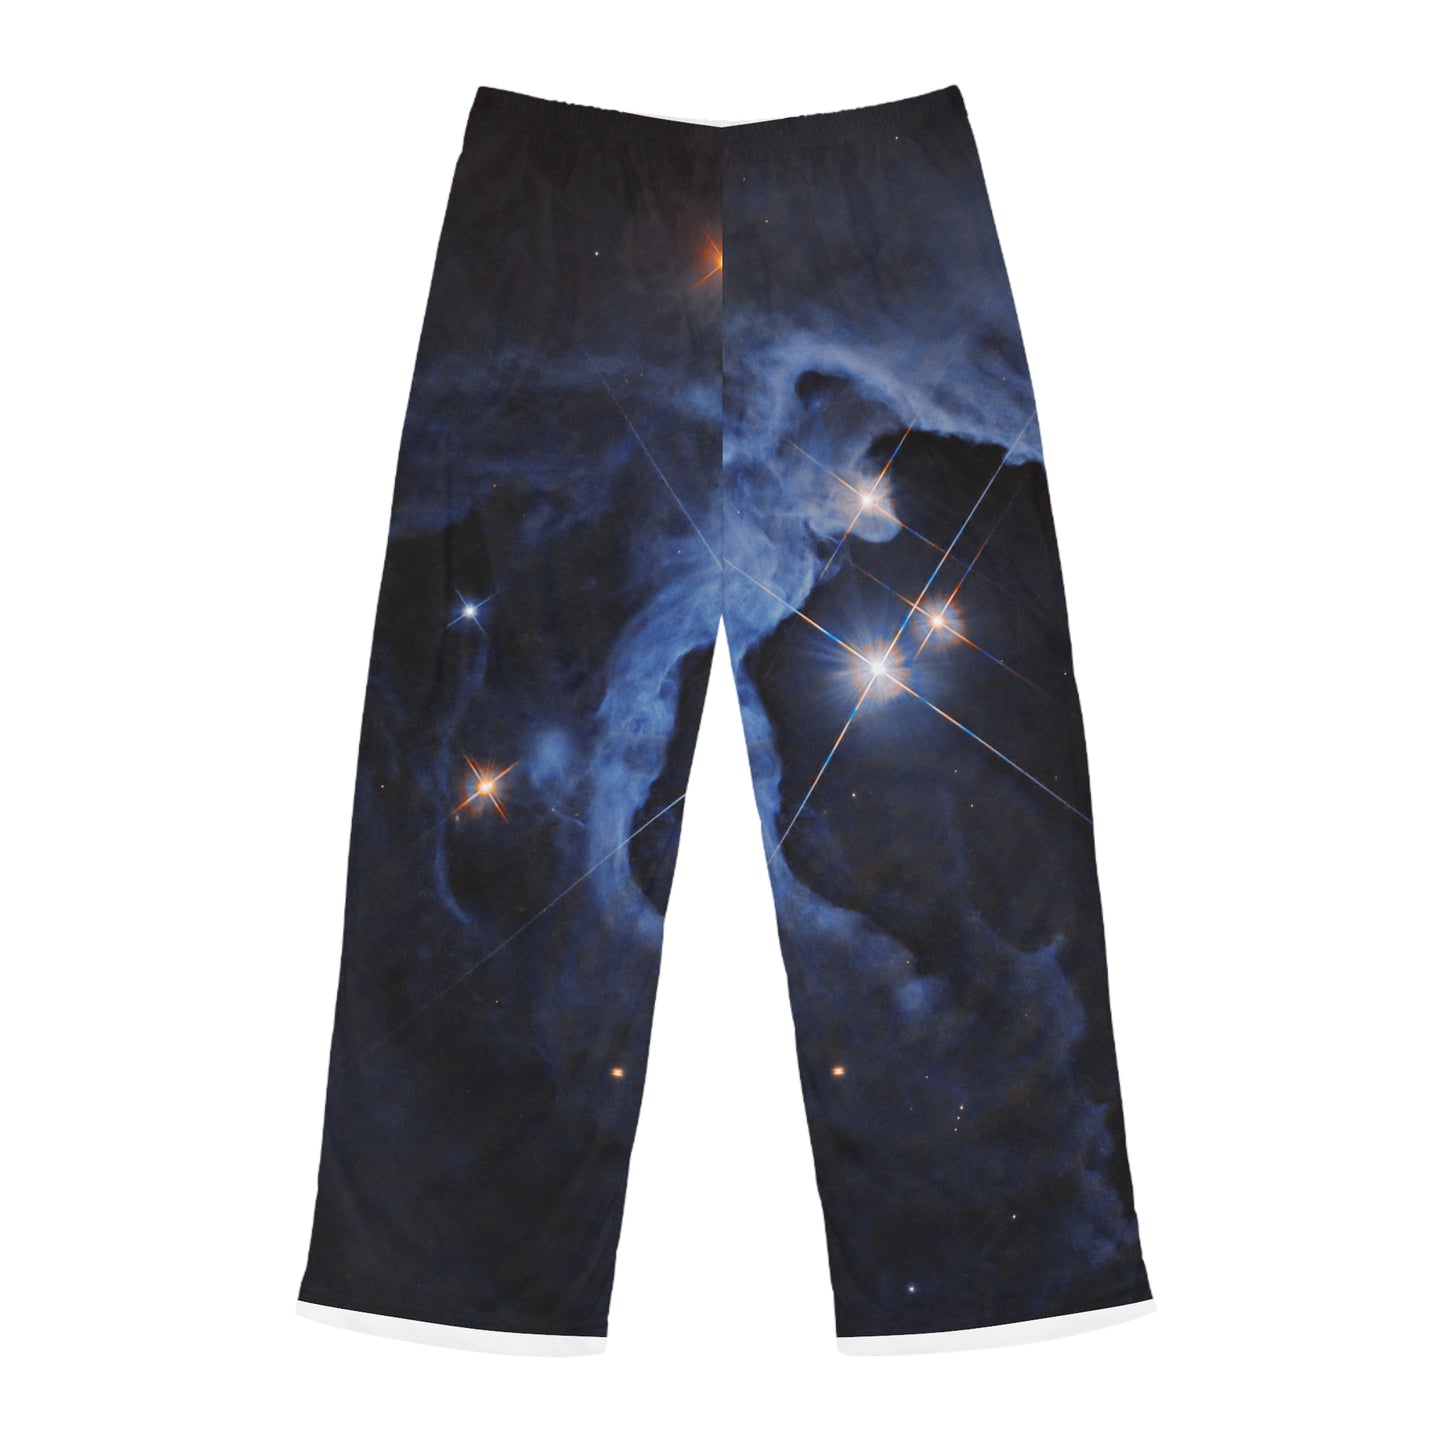 HP Tau, HP Tau G2, and G3 3 star system captured by Hubble - men's Lounge Pants